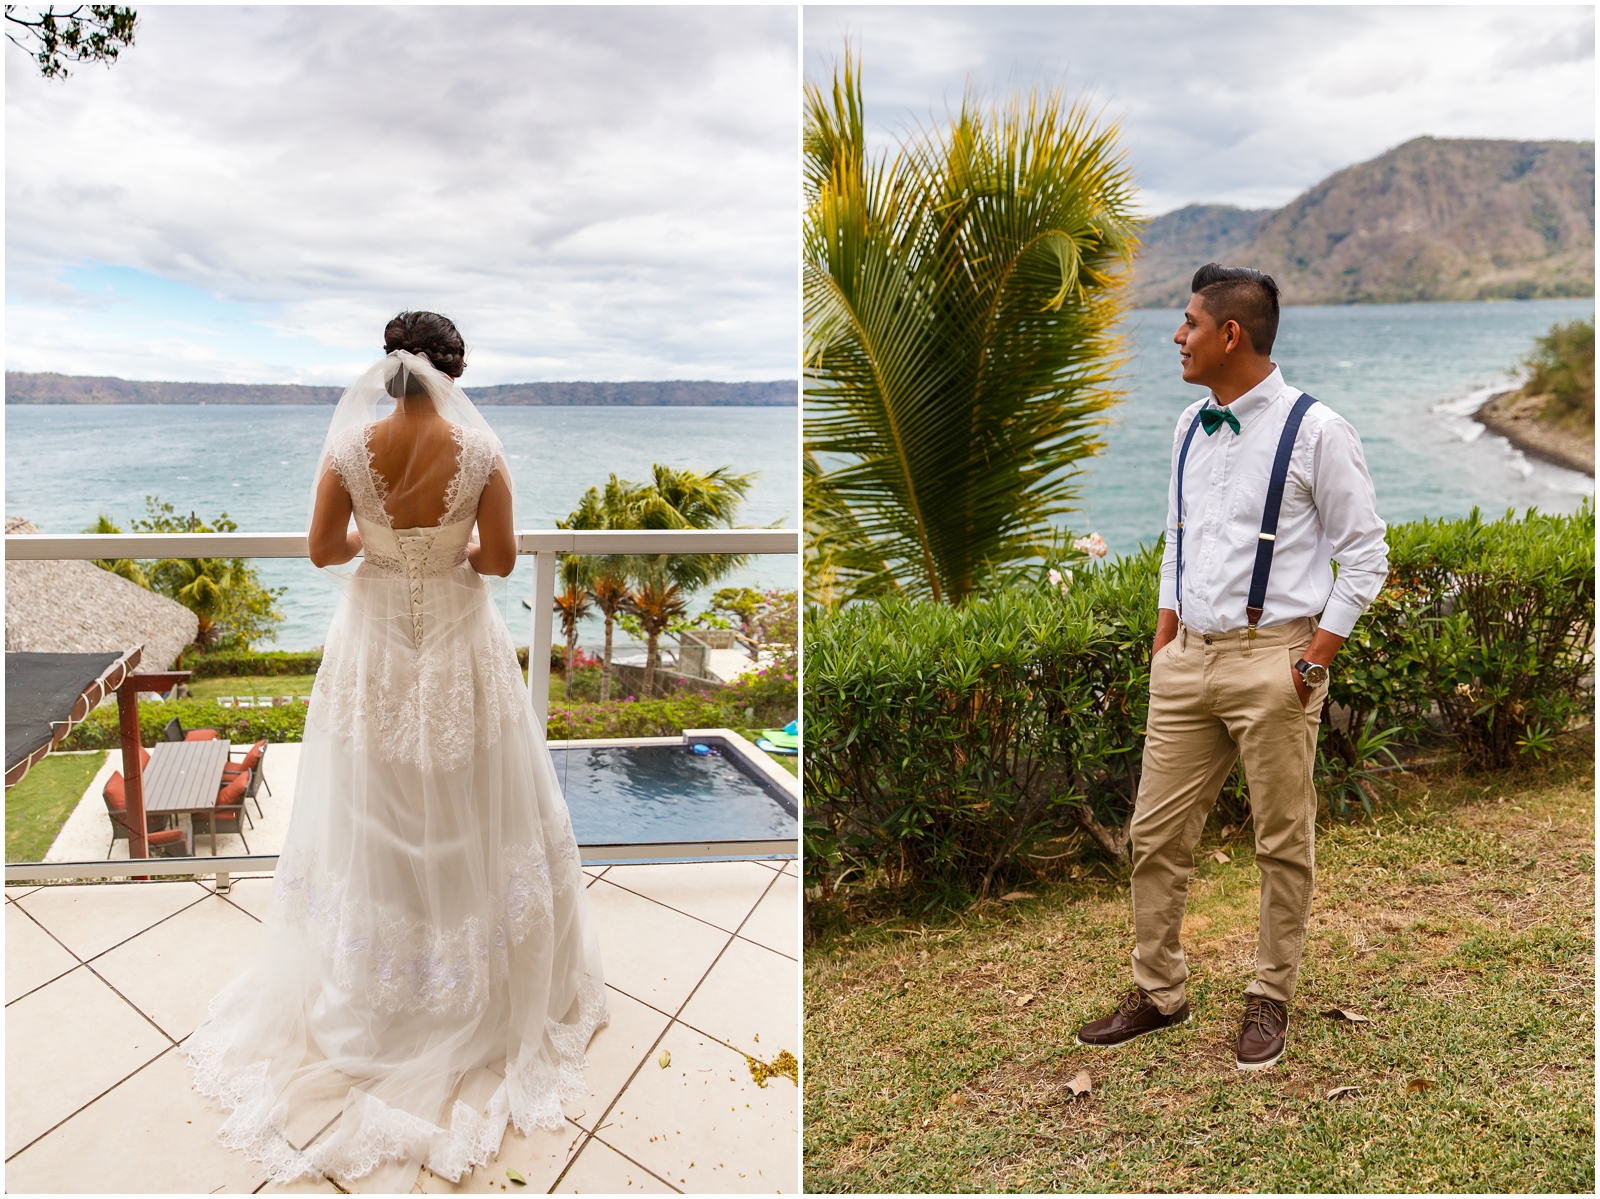 This couple got married in an airbnb on a lake in Nicaragua.